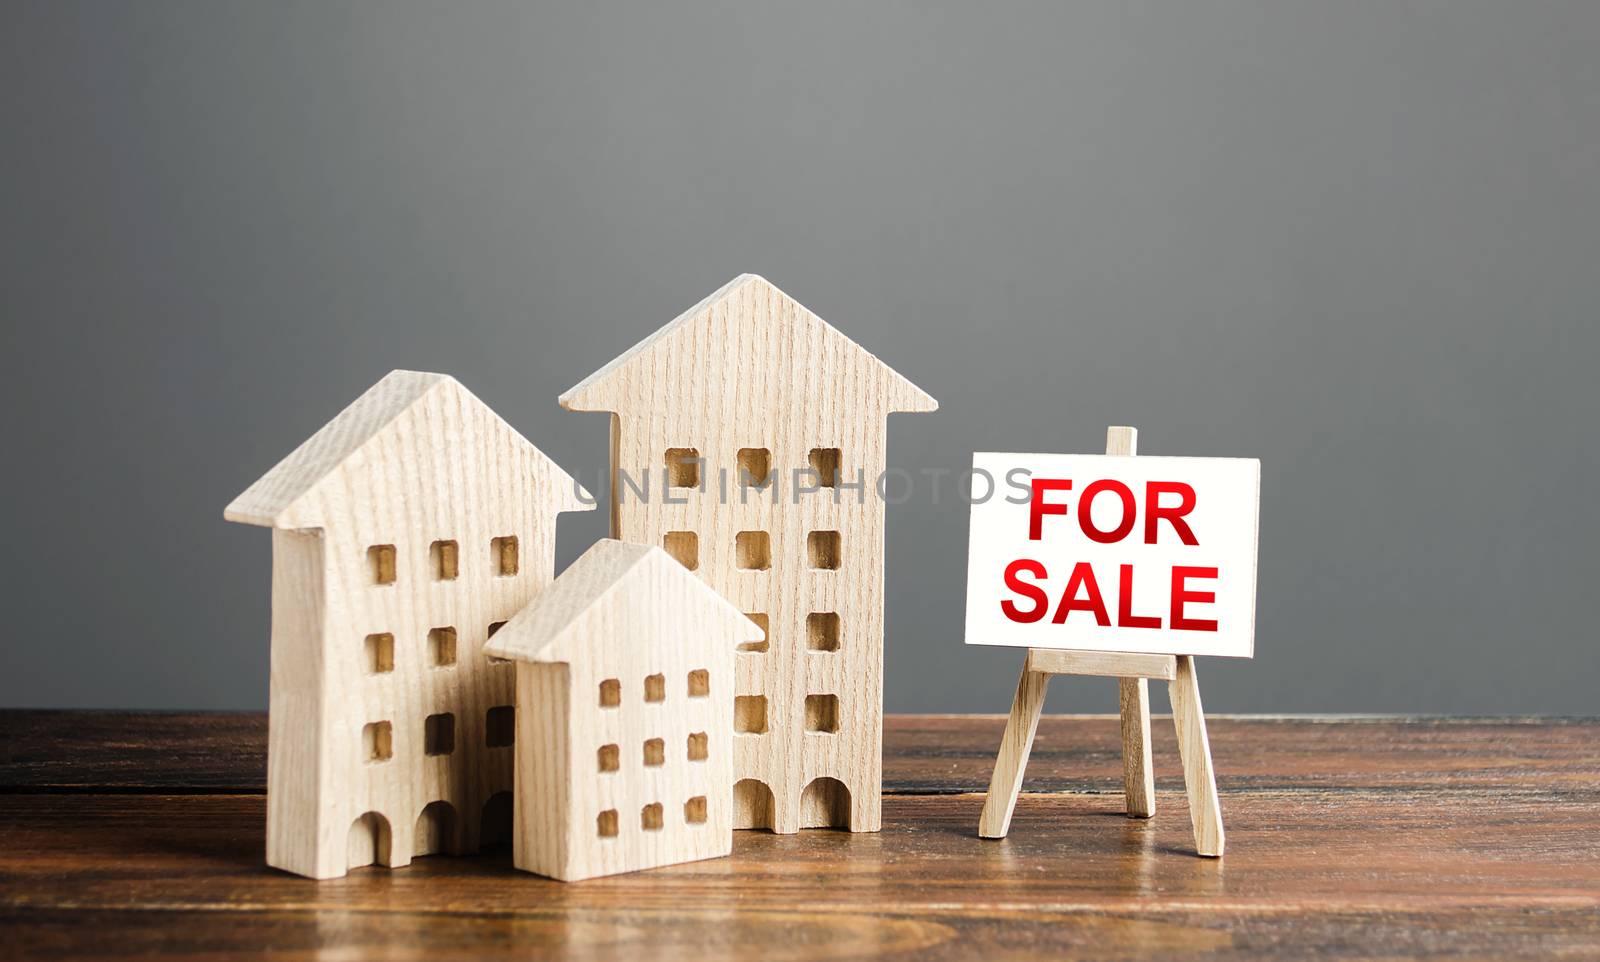 Wooden figures of residential buildings and an easel sign labeled for sale. Buying and selling real estate, hot offers and property valuation. Smart investments and relocation. Good offer by iLixe48